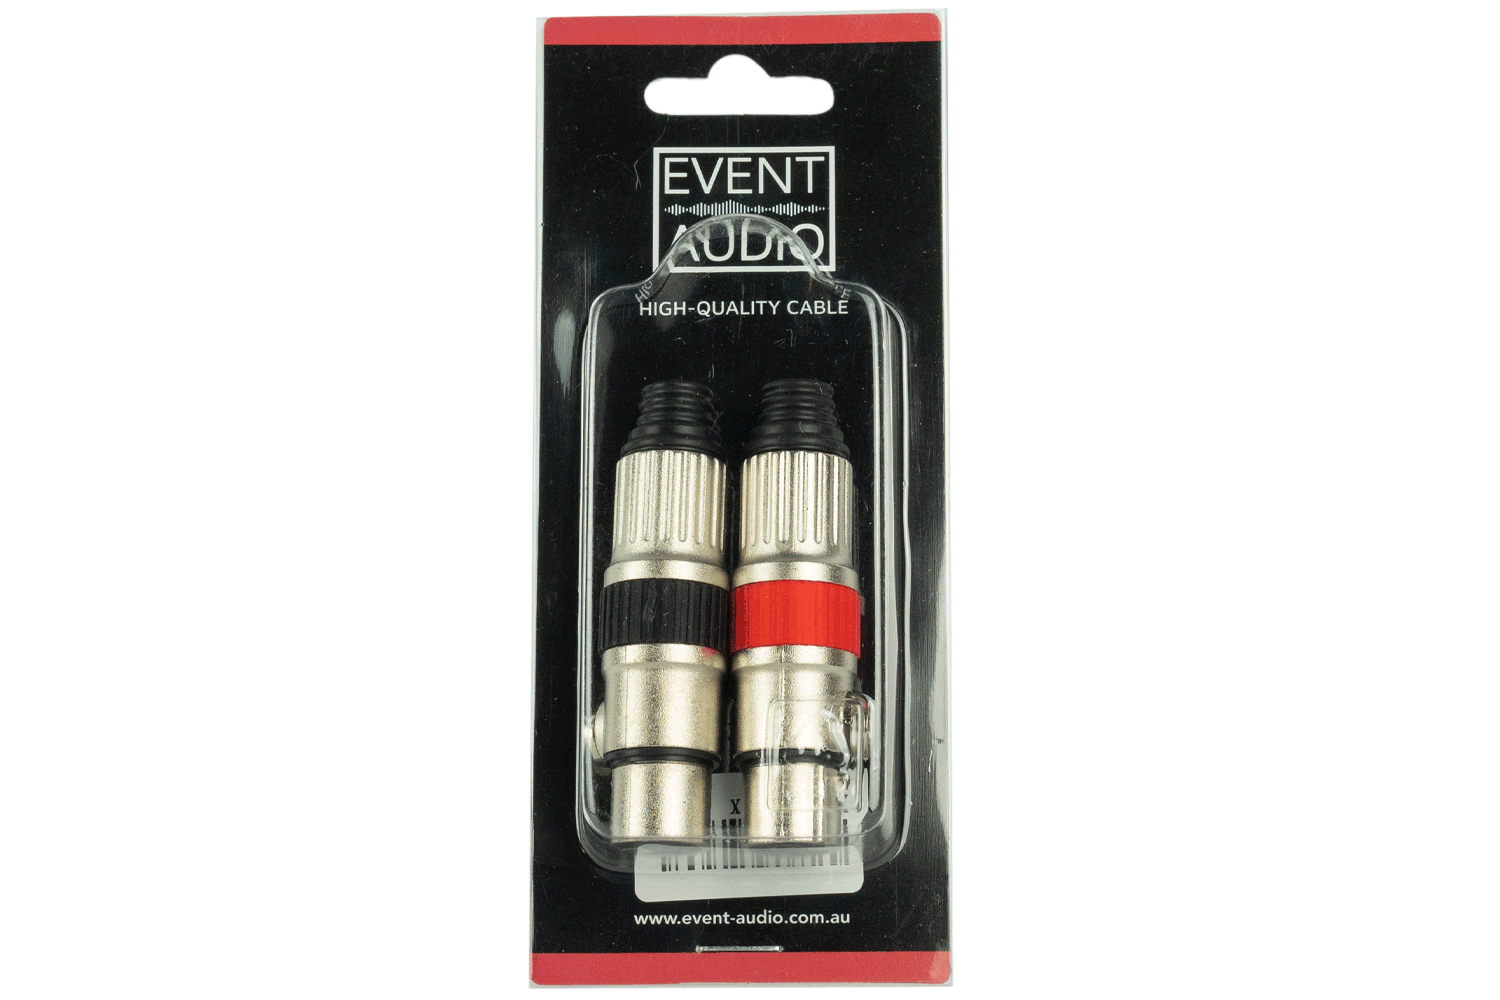 Event Audio XLRM - Pair of XLR 3 Pin Male Audio Plugs packaging 